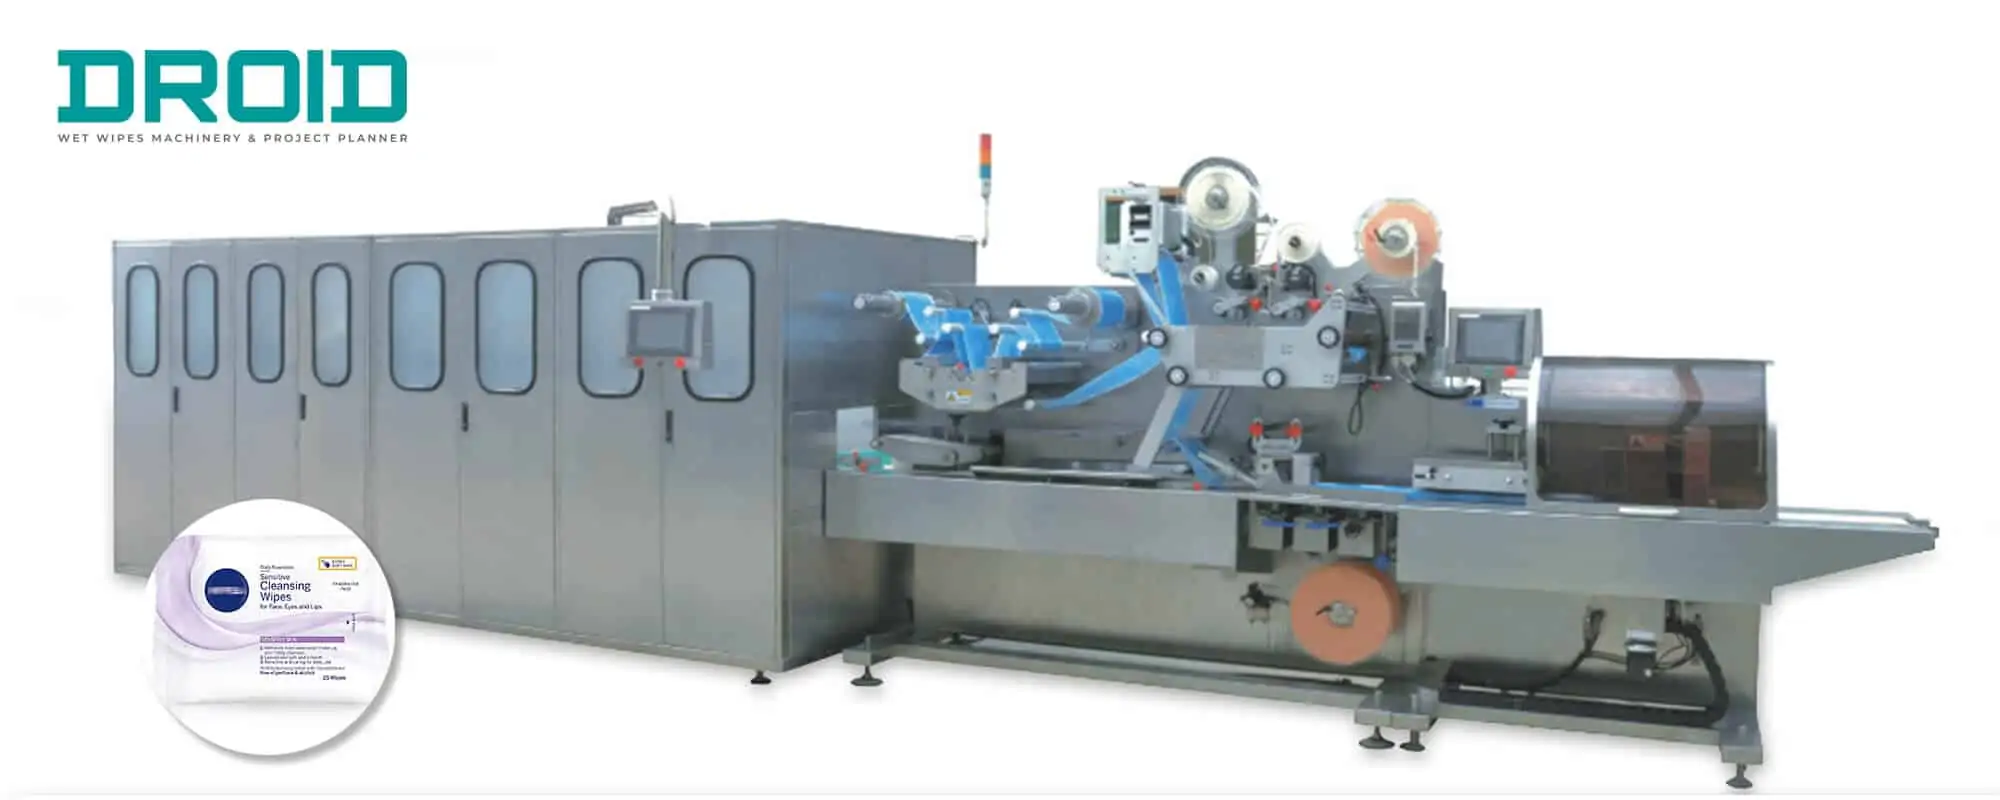 UT FL2 crossfol wet wipes converting and packaging machine - Wet Wipes Machine Products